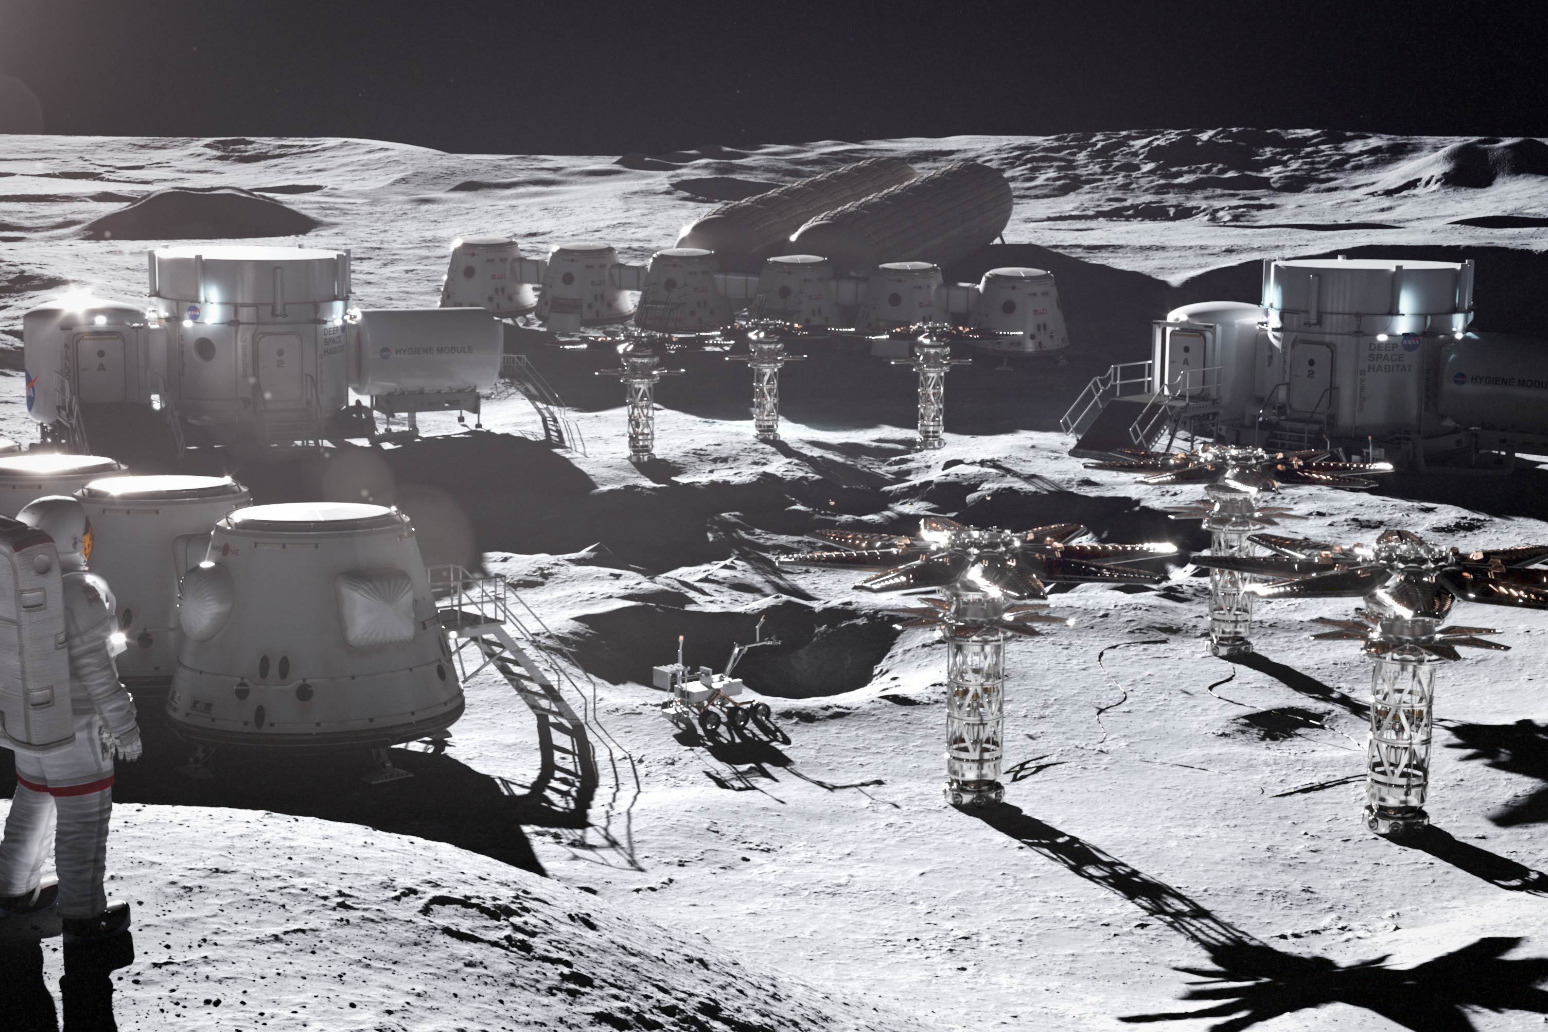 Rolls-Royce receives funding to develop nuclear reactor for Moon exploration 